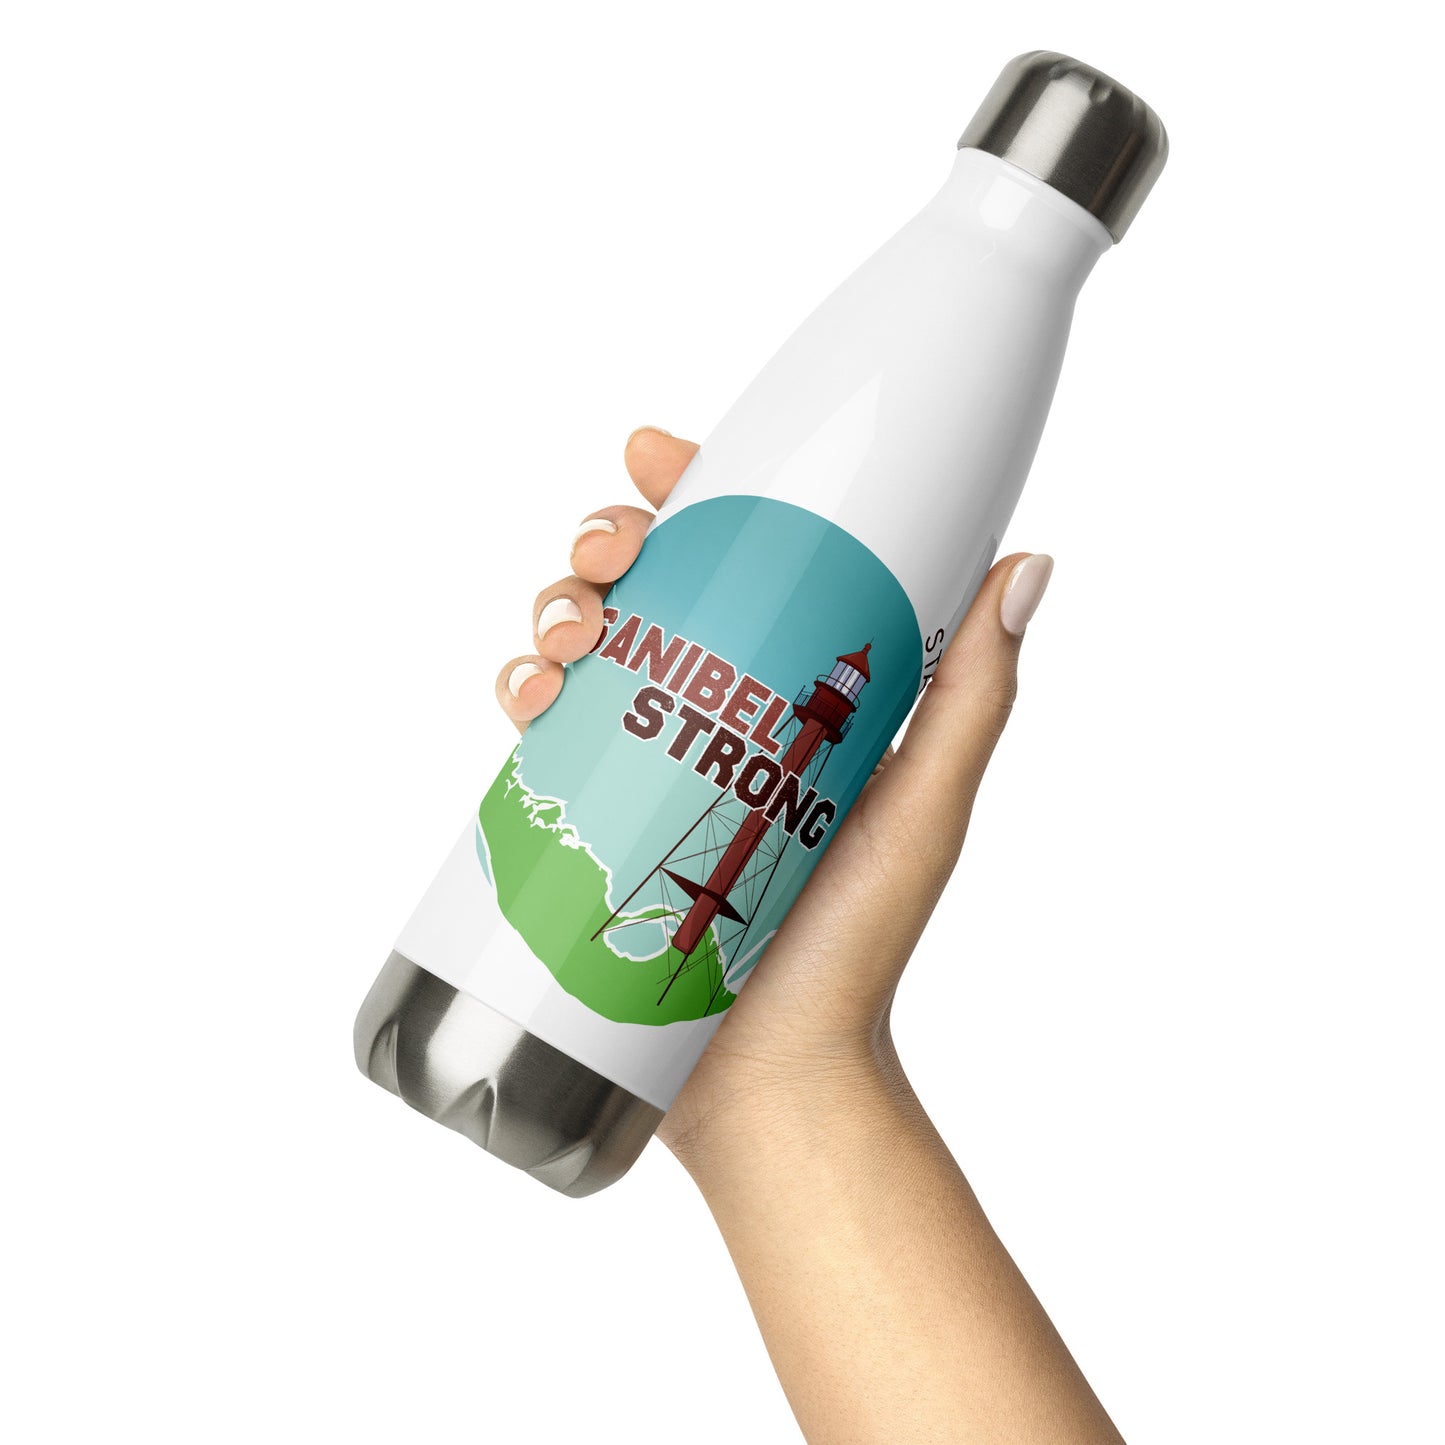 Sanibel Strong Standing Tall Stainless Steel Water Bottle